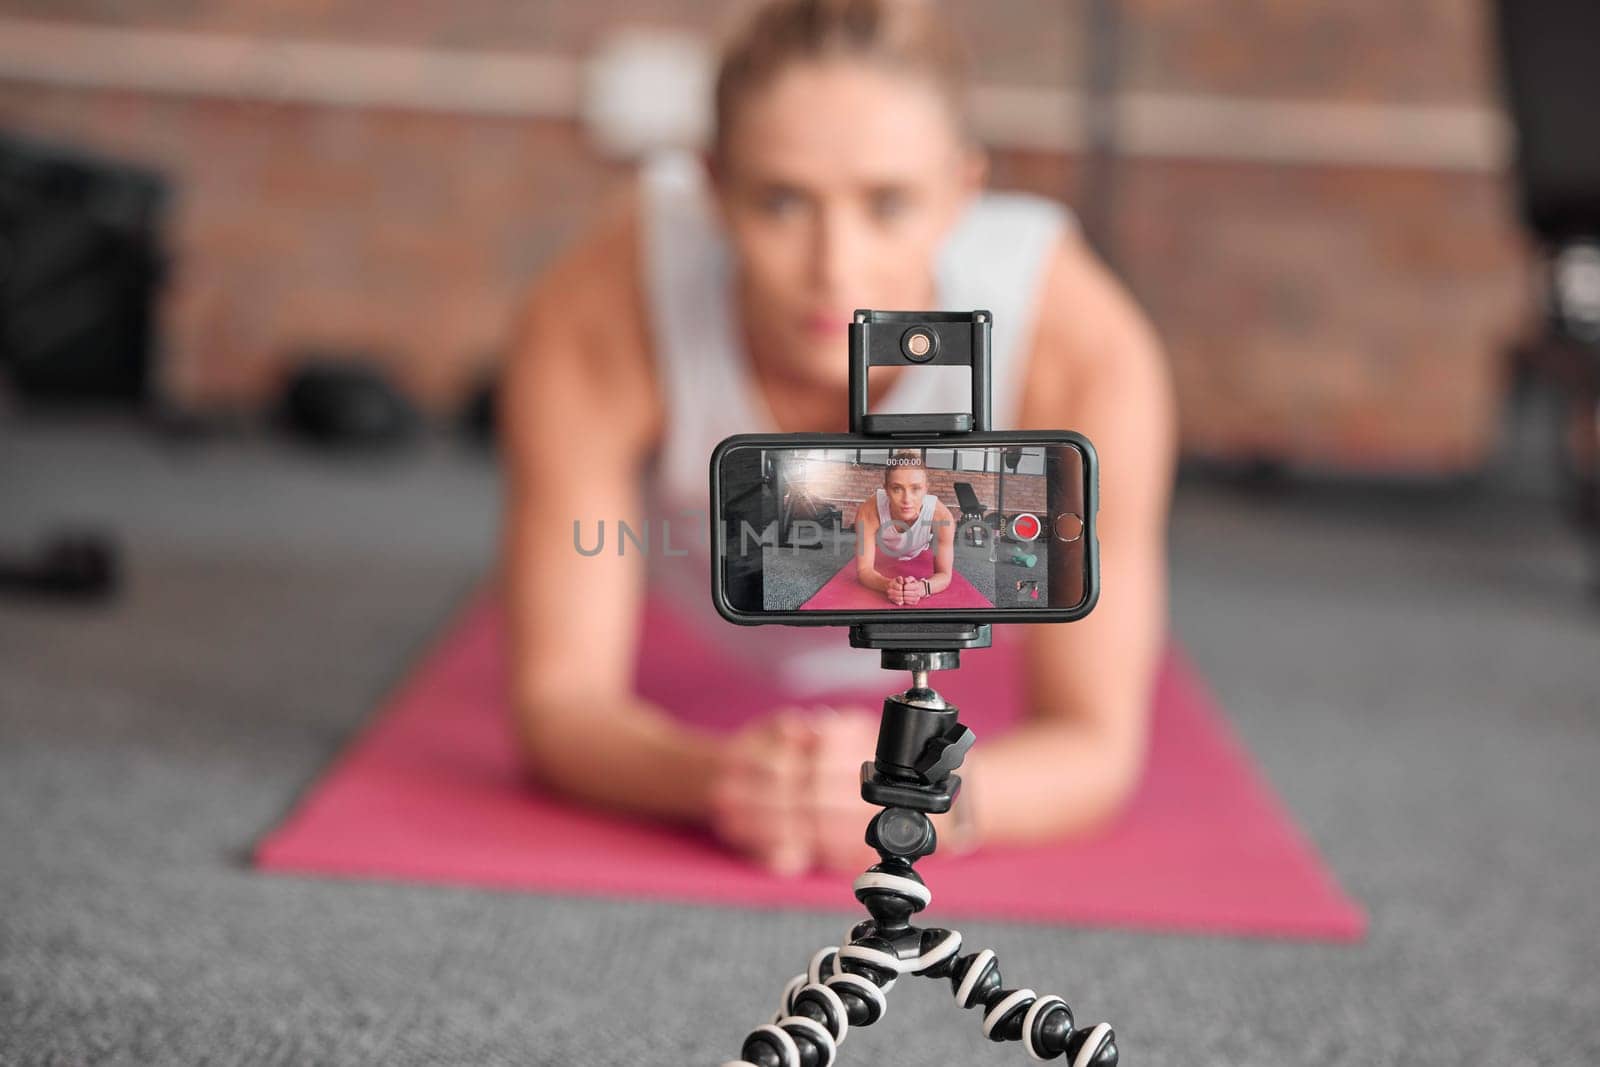 Live streaming, fitness and phone of woman exercise, pilates or workout on social media or video platform on tripod. Gen z athlete, sports influencer or content creator training on smartphone screen.